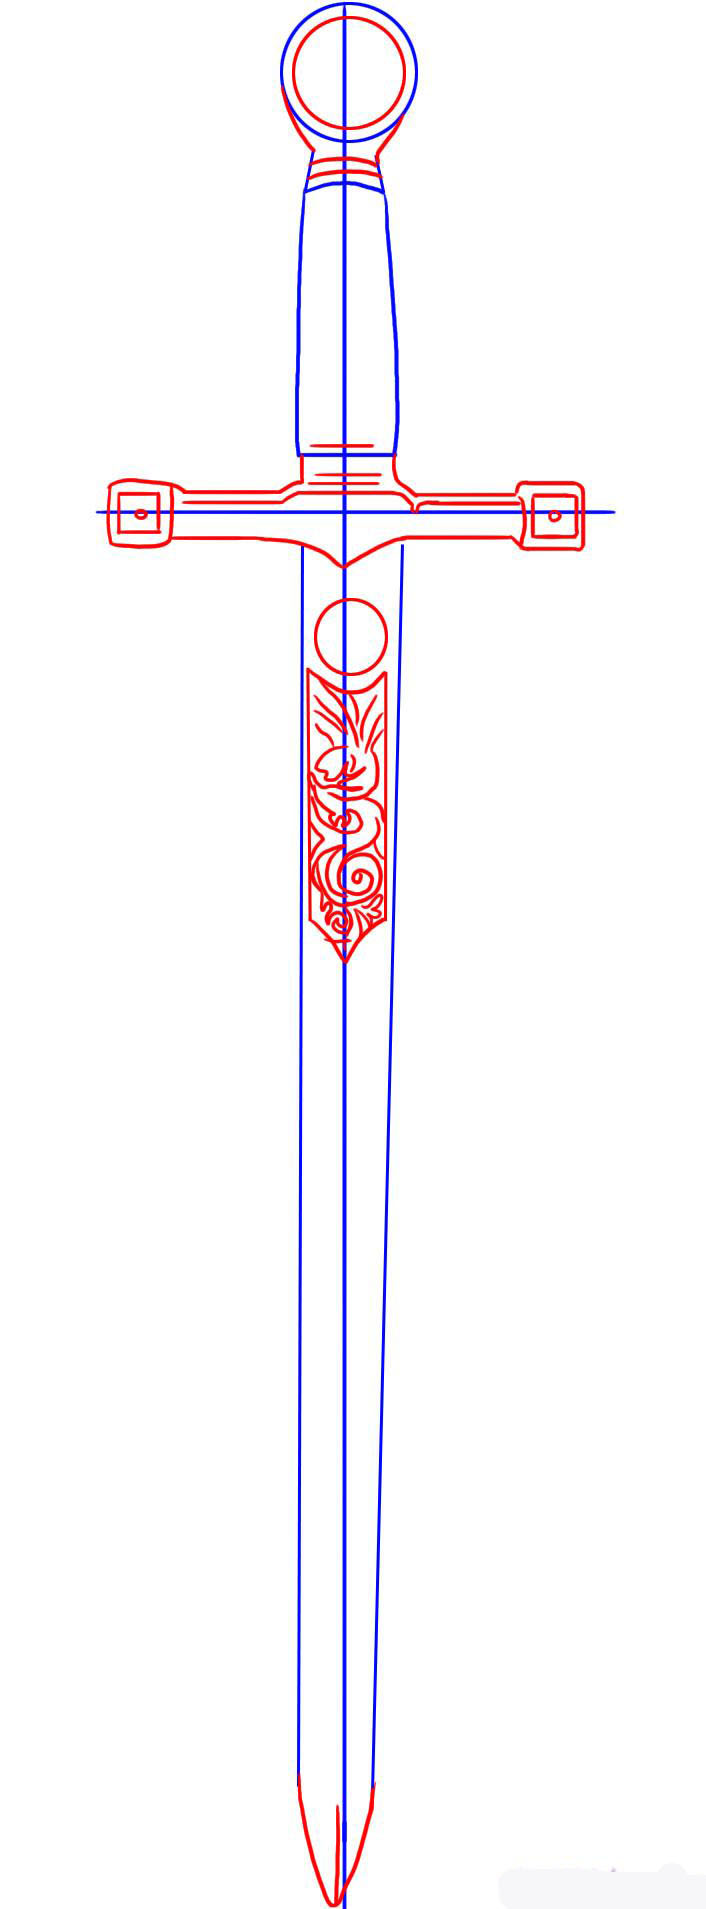 how-to-draw-excalibur-sword-in-the-stone-step-3_1_000000005597_5